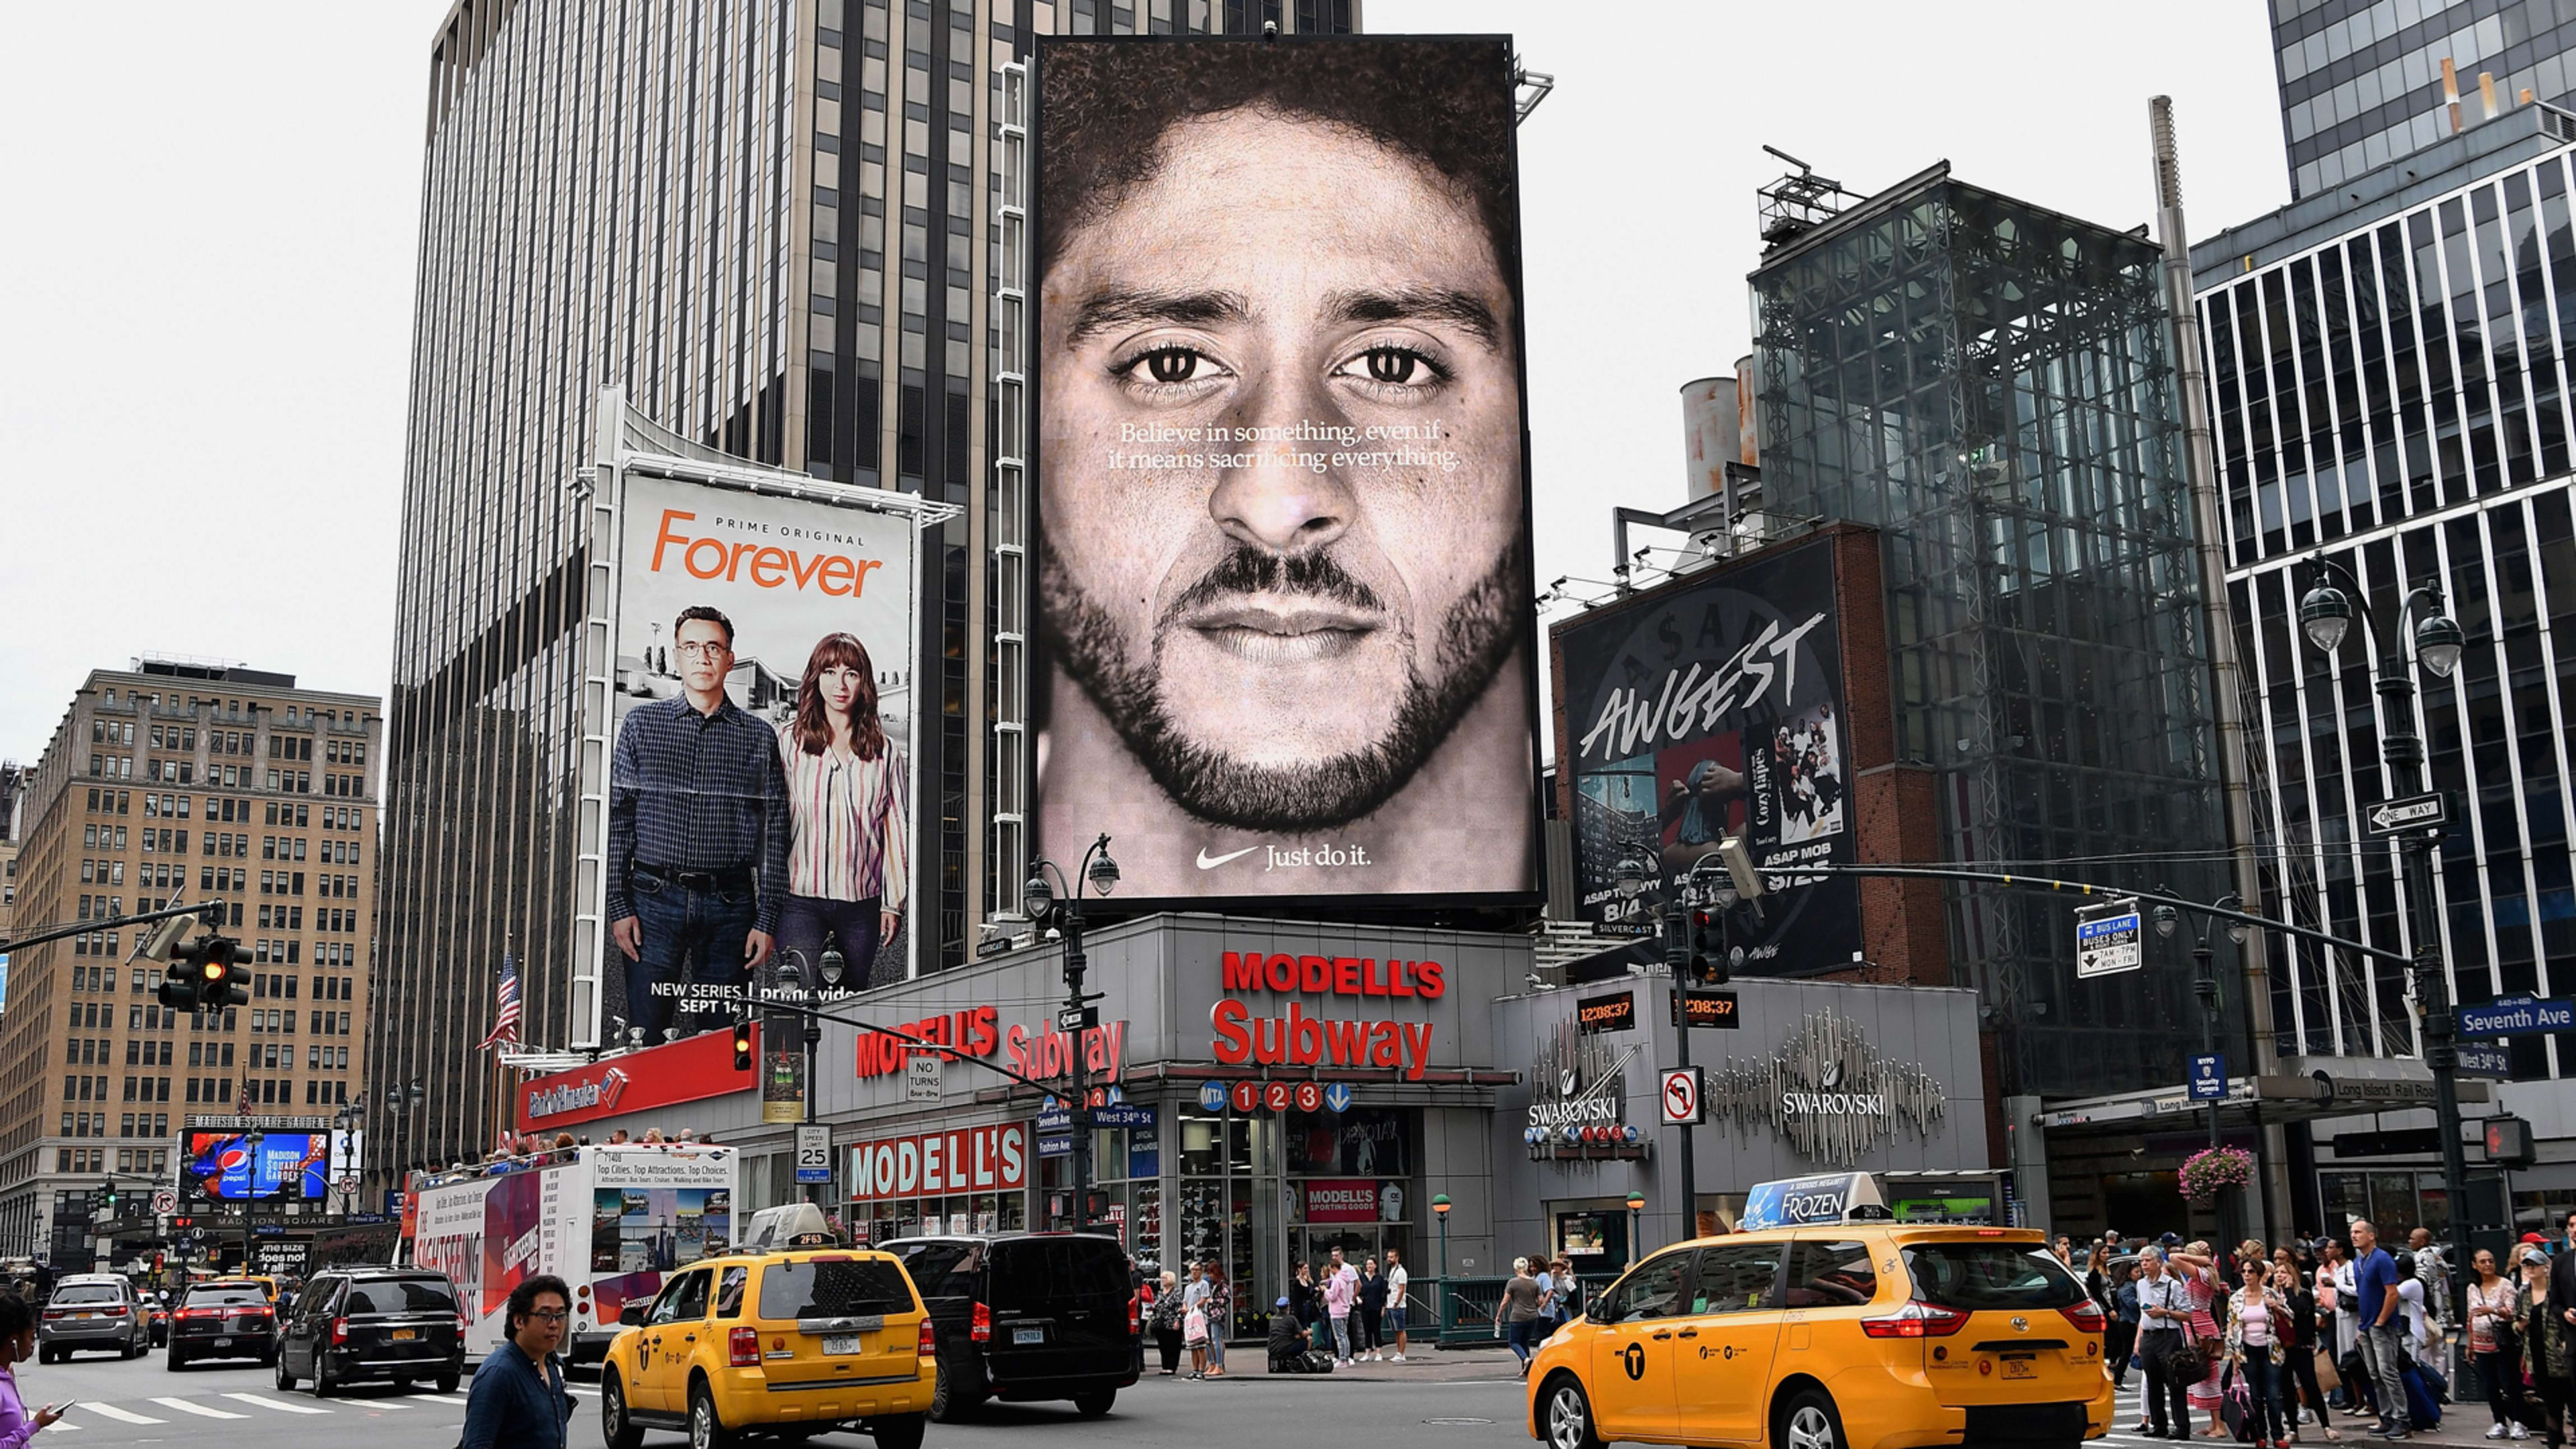 Colin Kaepernick wants to get his face and afro trademarked